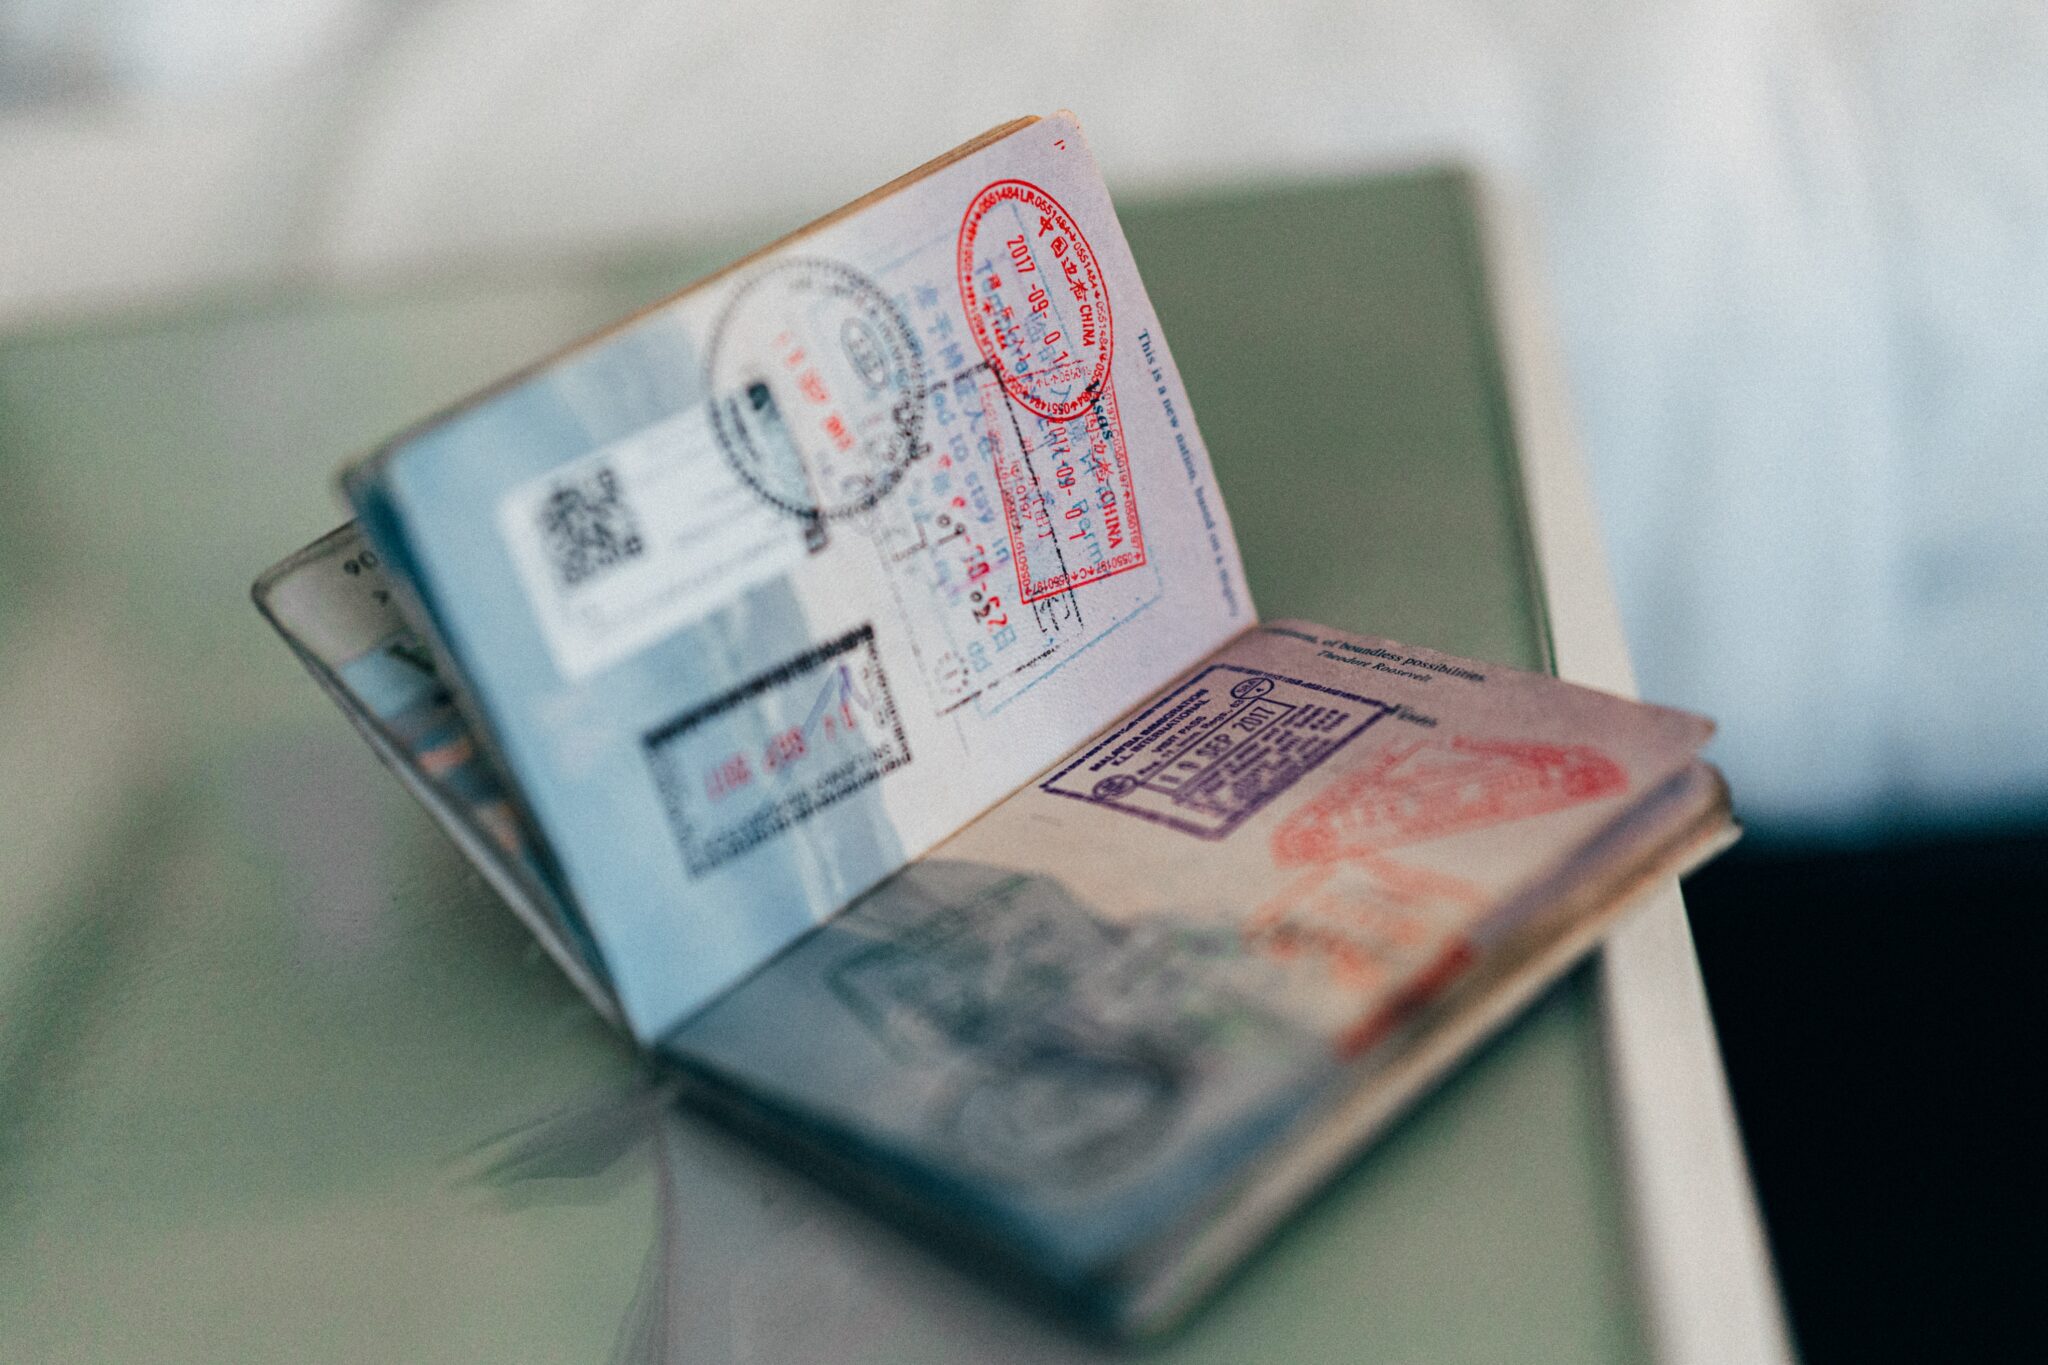 Singapore has unseated Japan's five-year reign as the world's strongest passport ranked according to visa-free travel access. Source: Unsplash